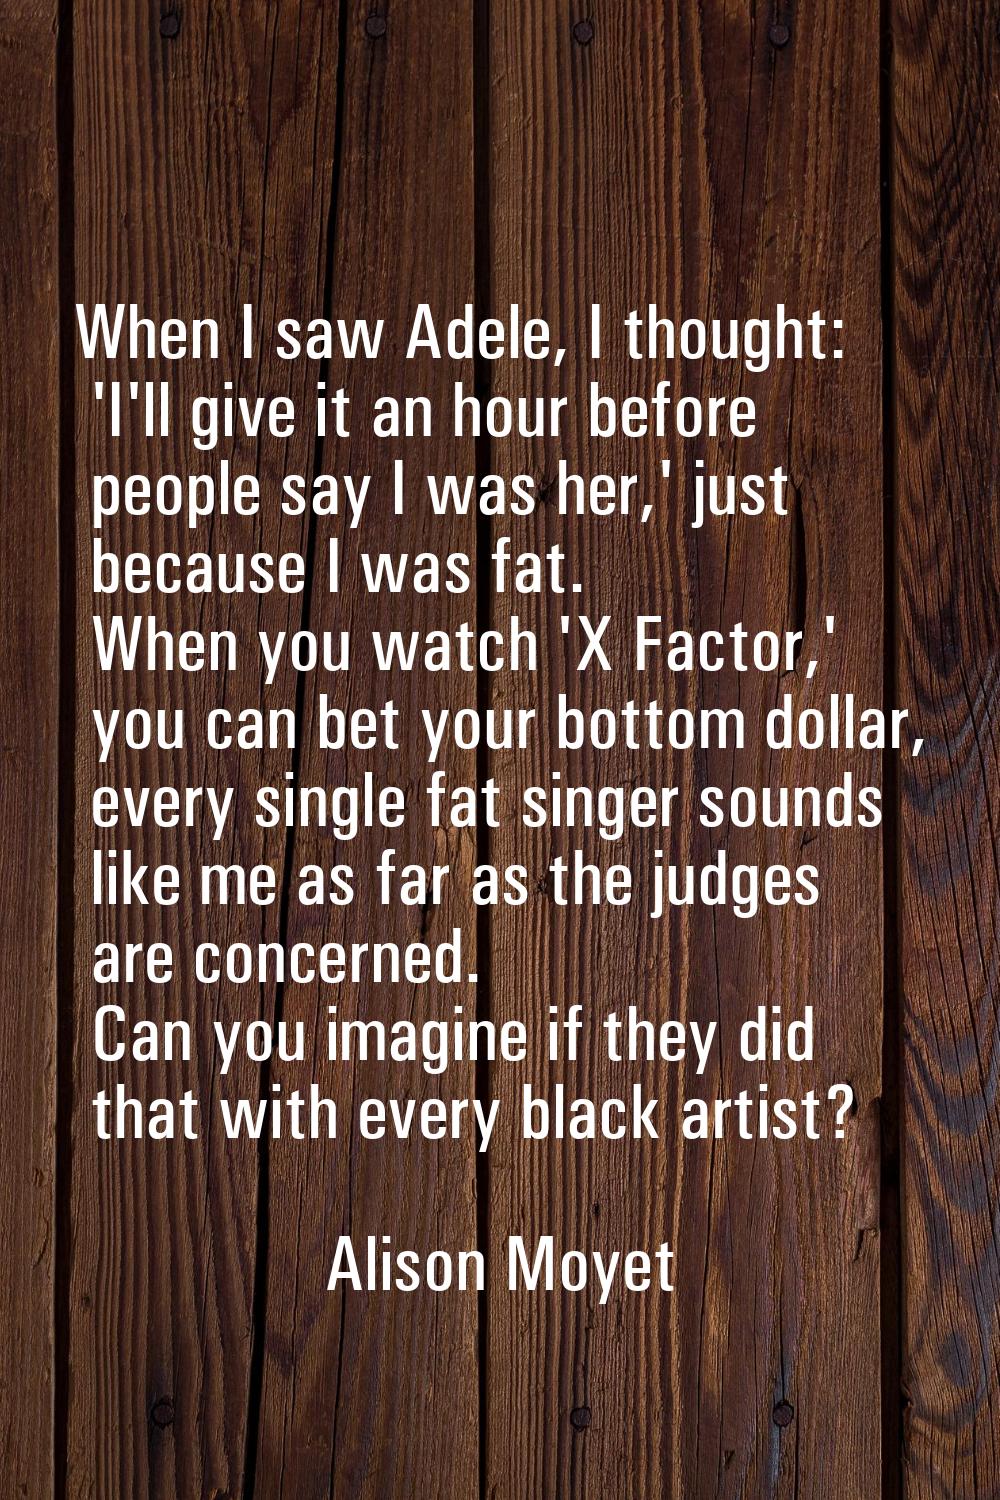 When I saw Adele, I thought: 'I'll give it an hour before people say I was her,' just because I was